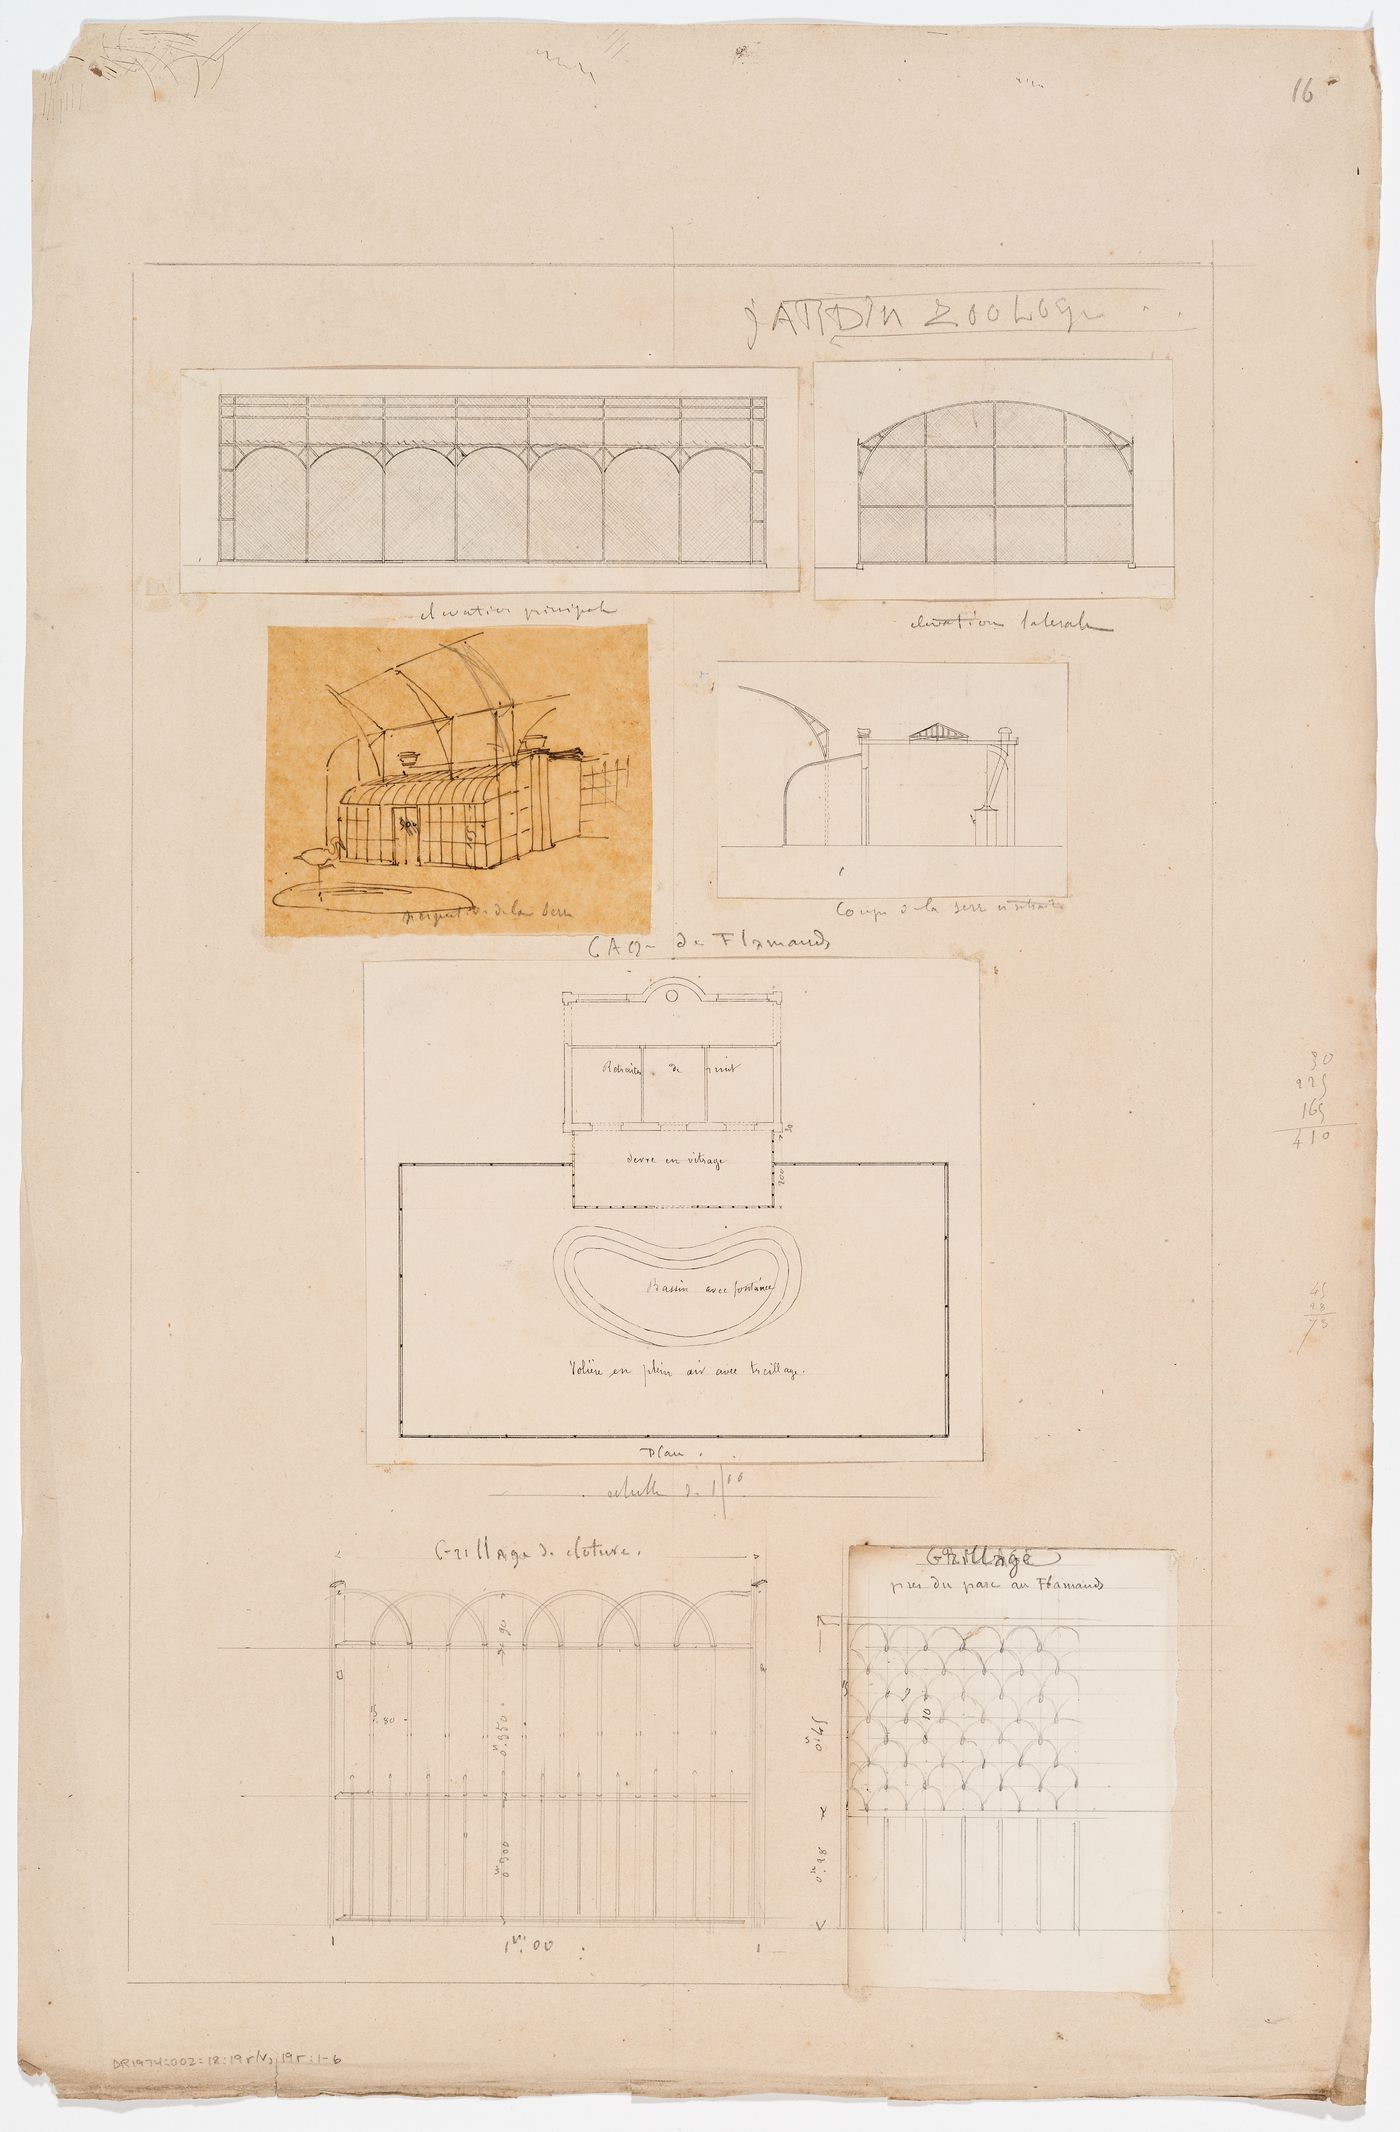 Zoological garden, Antwerp [?]: Elevations, perspective sketch, section, plan, and details of the flamingo aviary